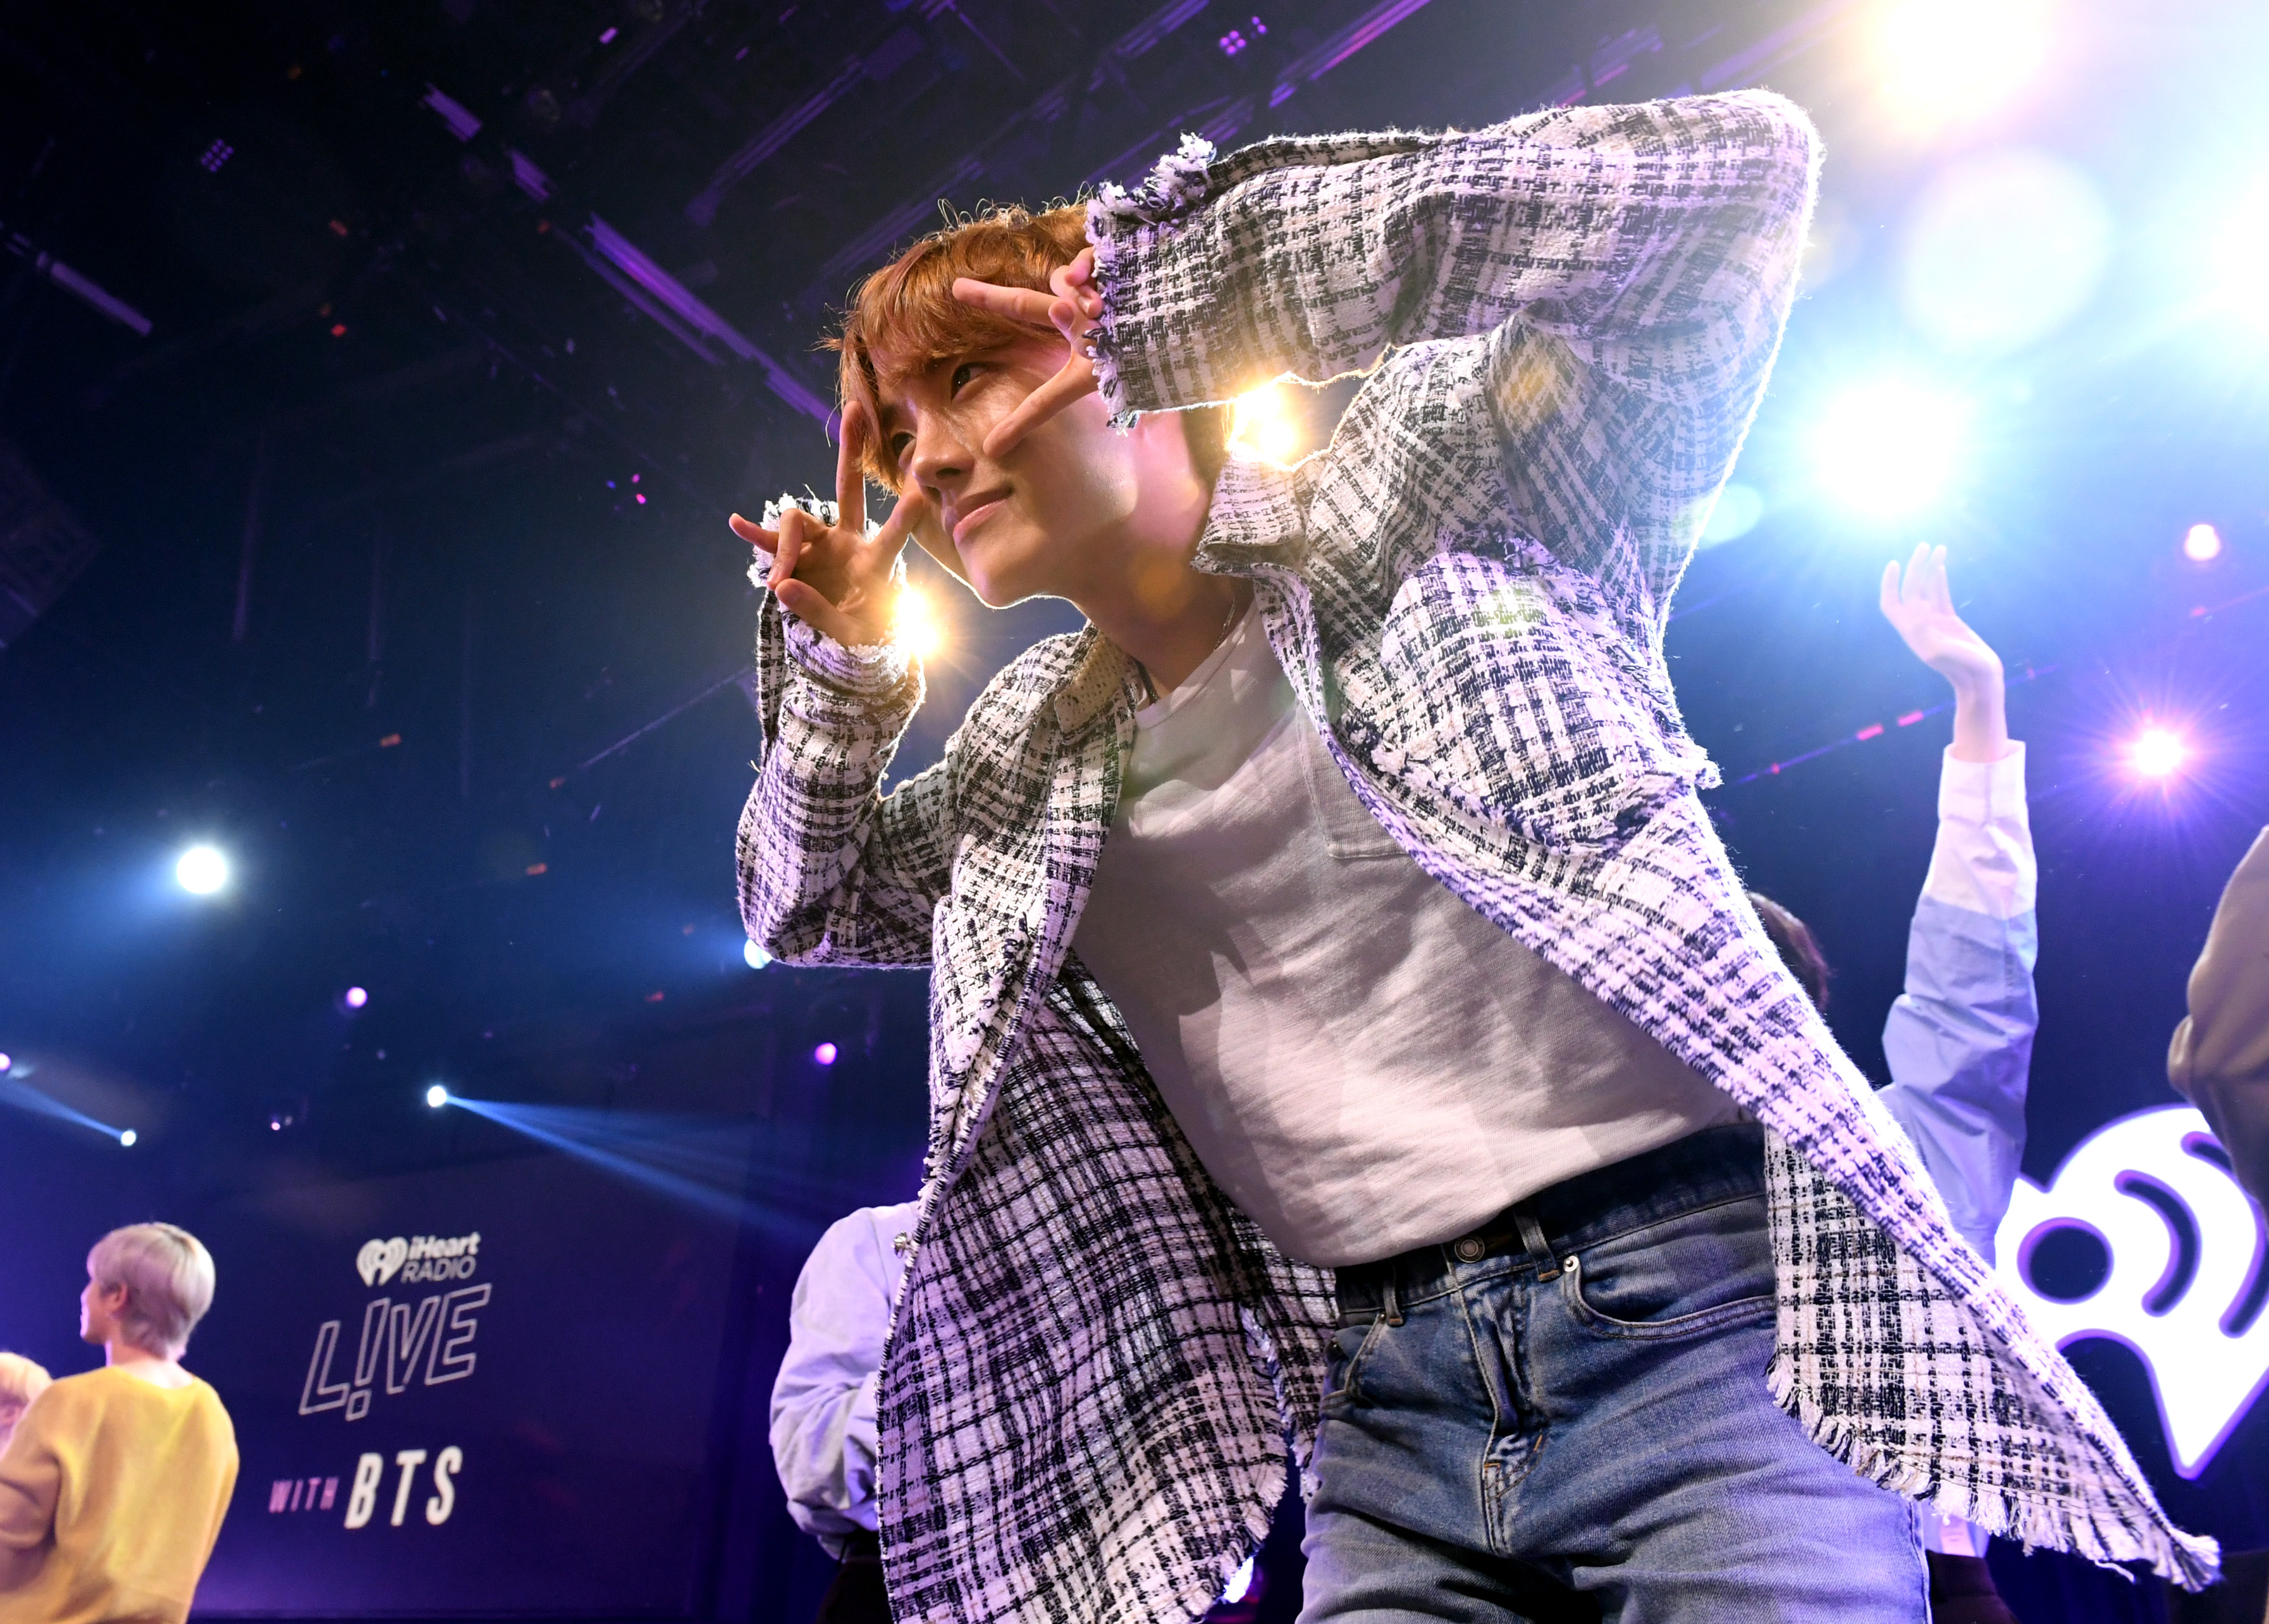 J-Hope of BTS onstage at iHeartRadio LIVE